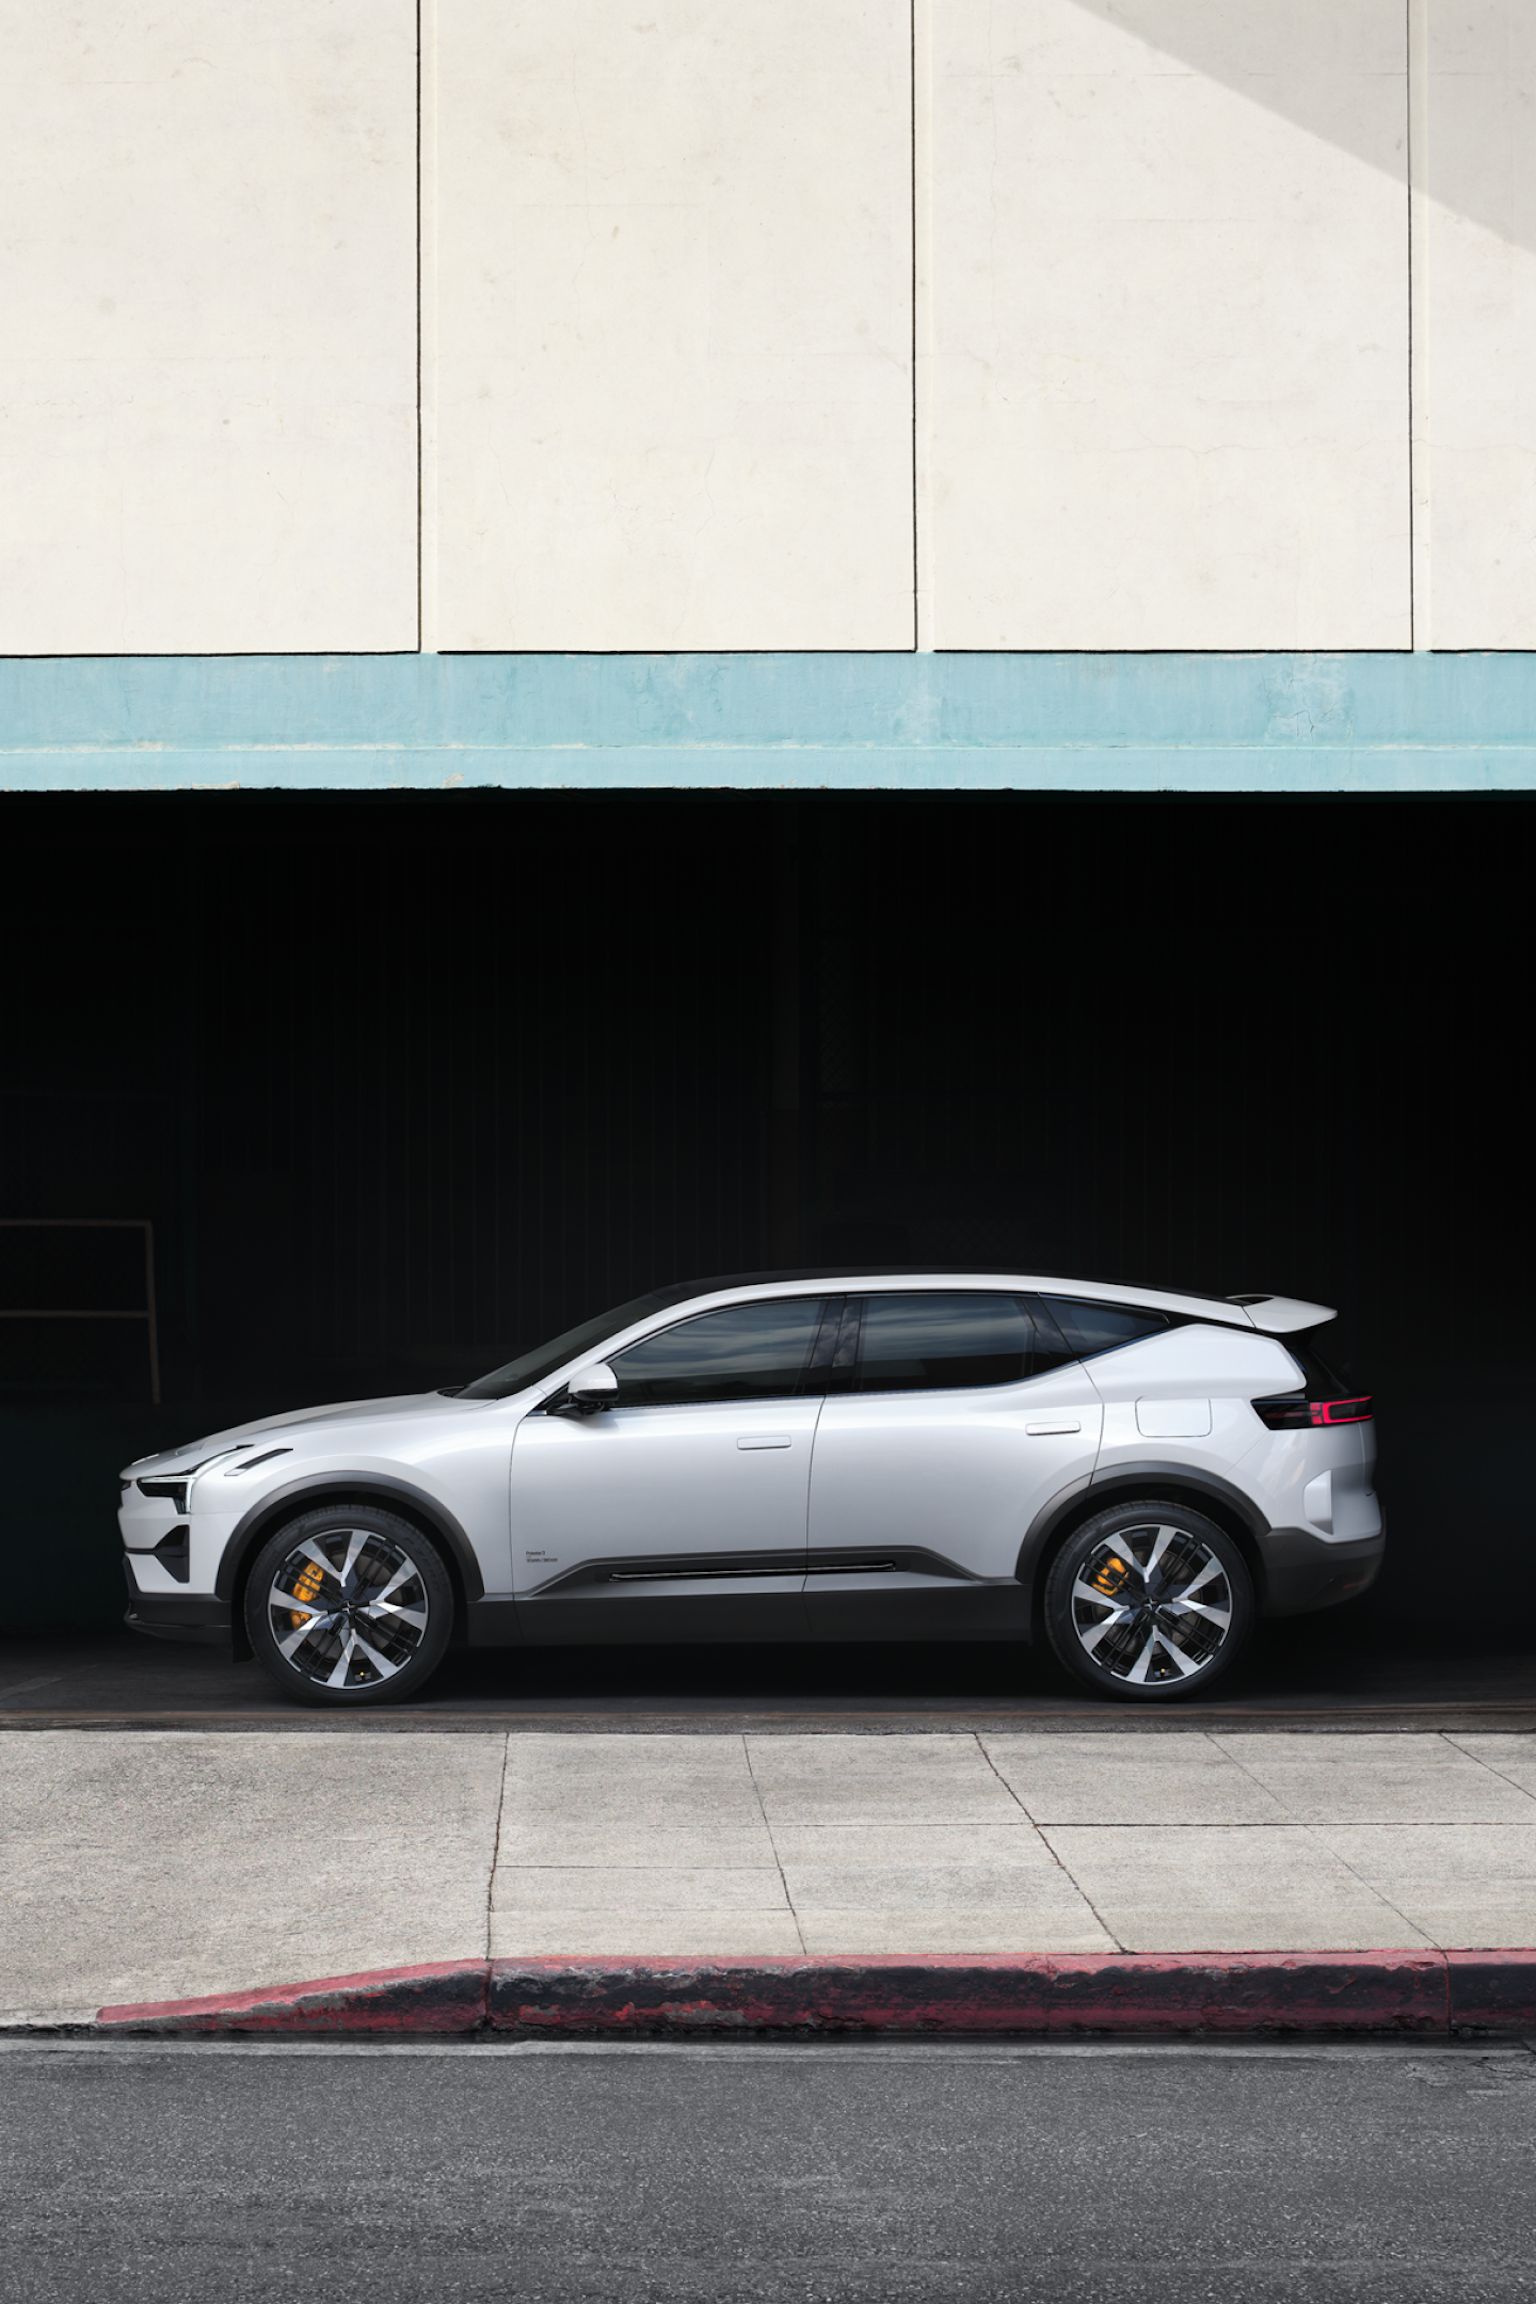 Polestar seen from the side, parked in a building.